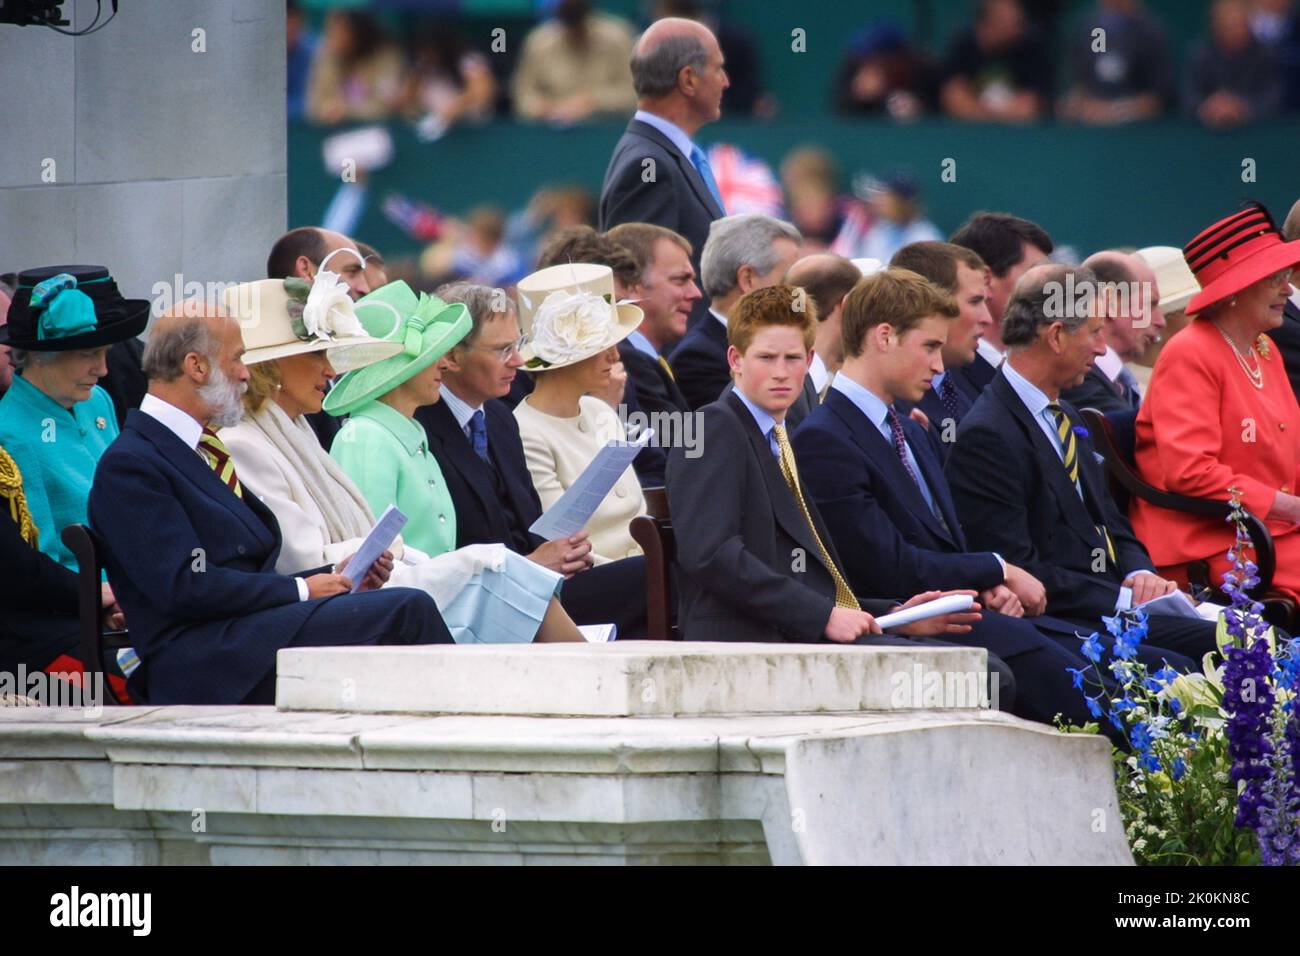 4th June 2002 - Queen Elizabeth II and members of the British Royal Family at her Golden Jubilee celebrations in The Mall in London Stock Photo